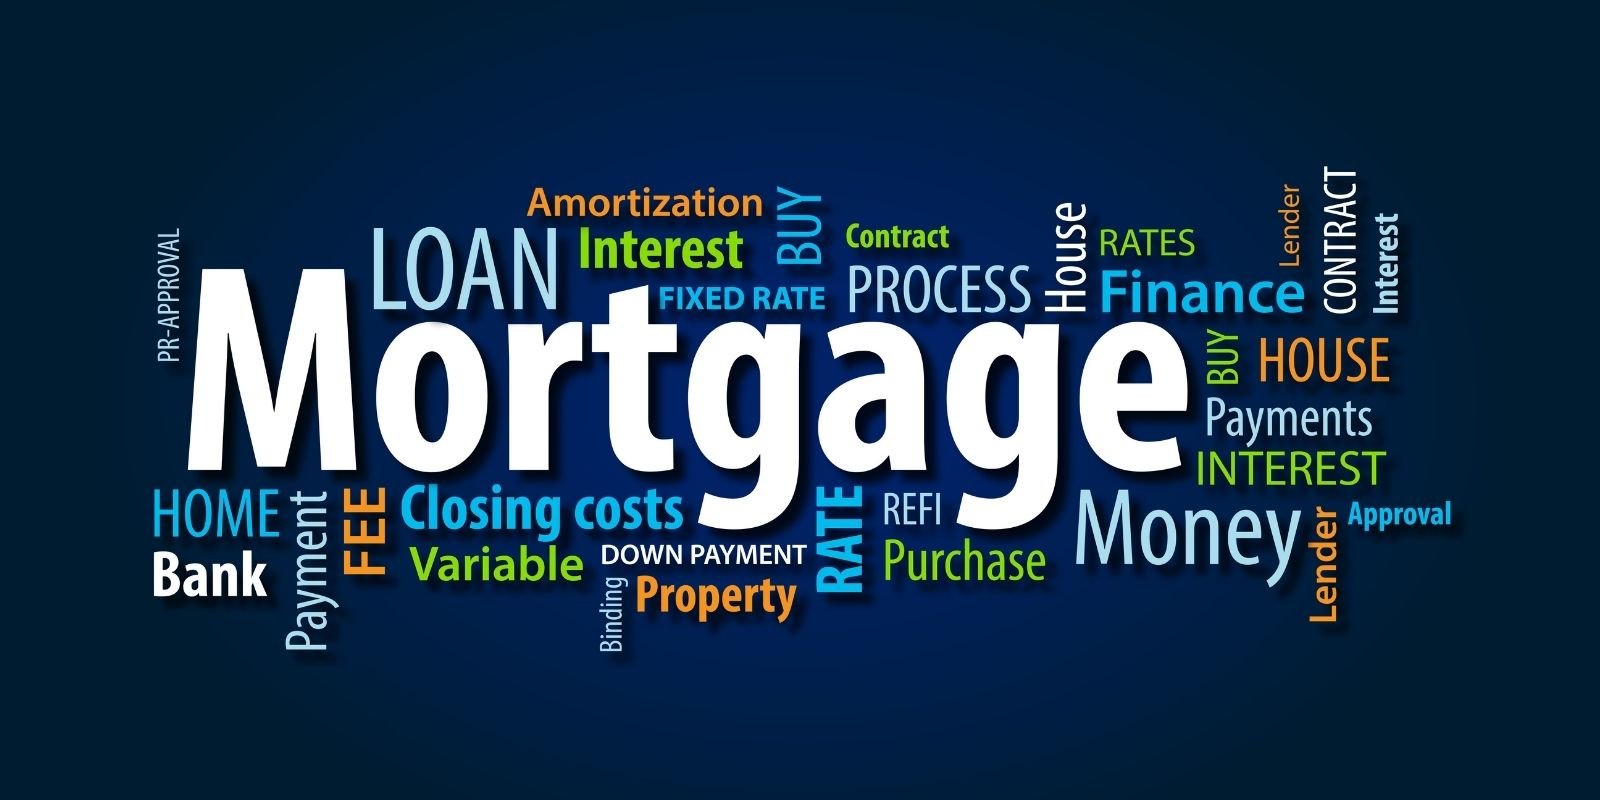 5. Research Mortgage Options